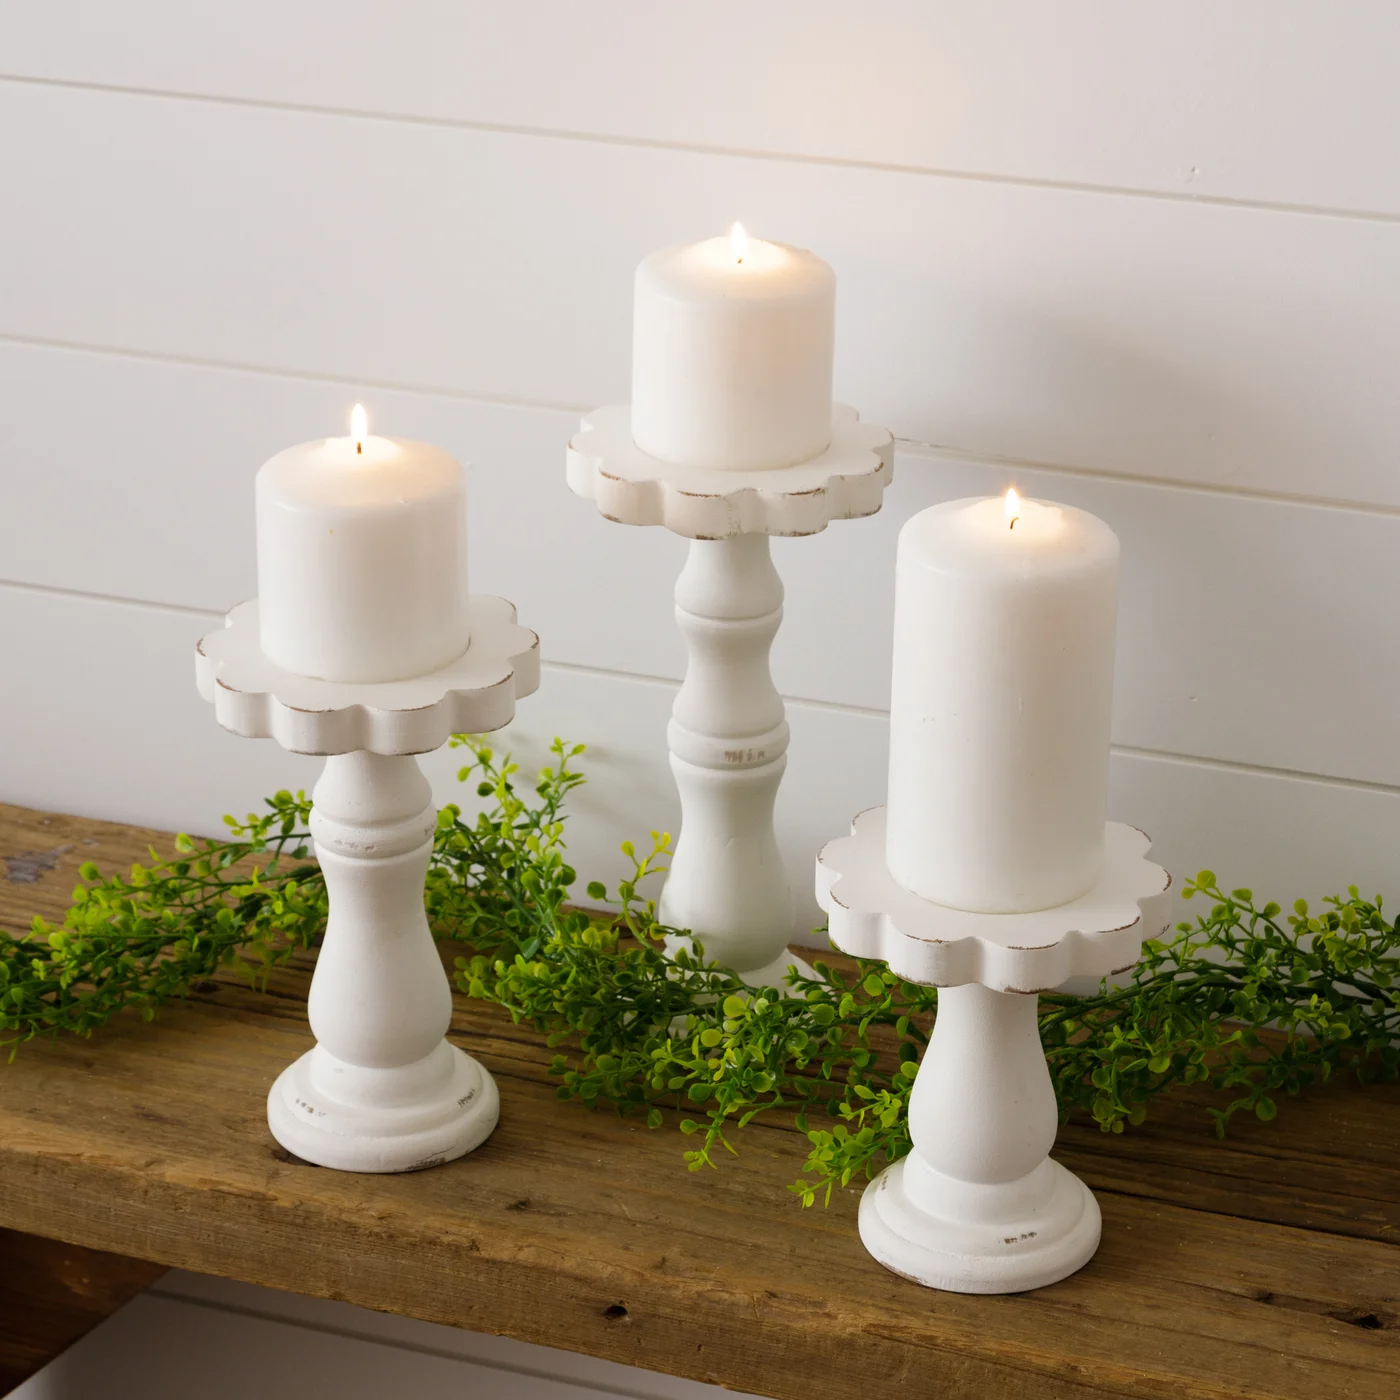 Set of 3 Floral Shaped Pillar Candle Holders